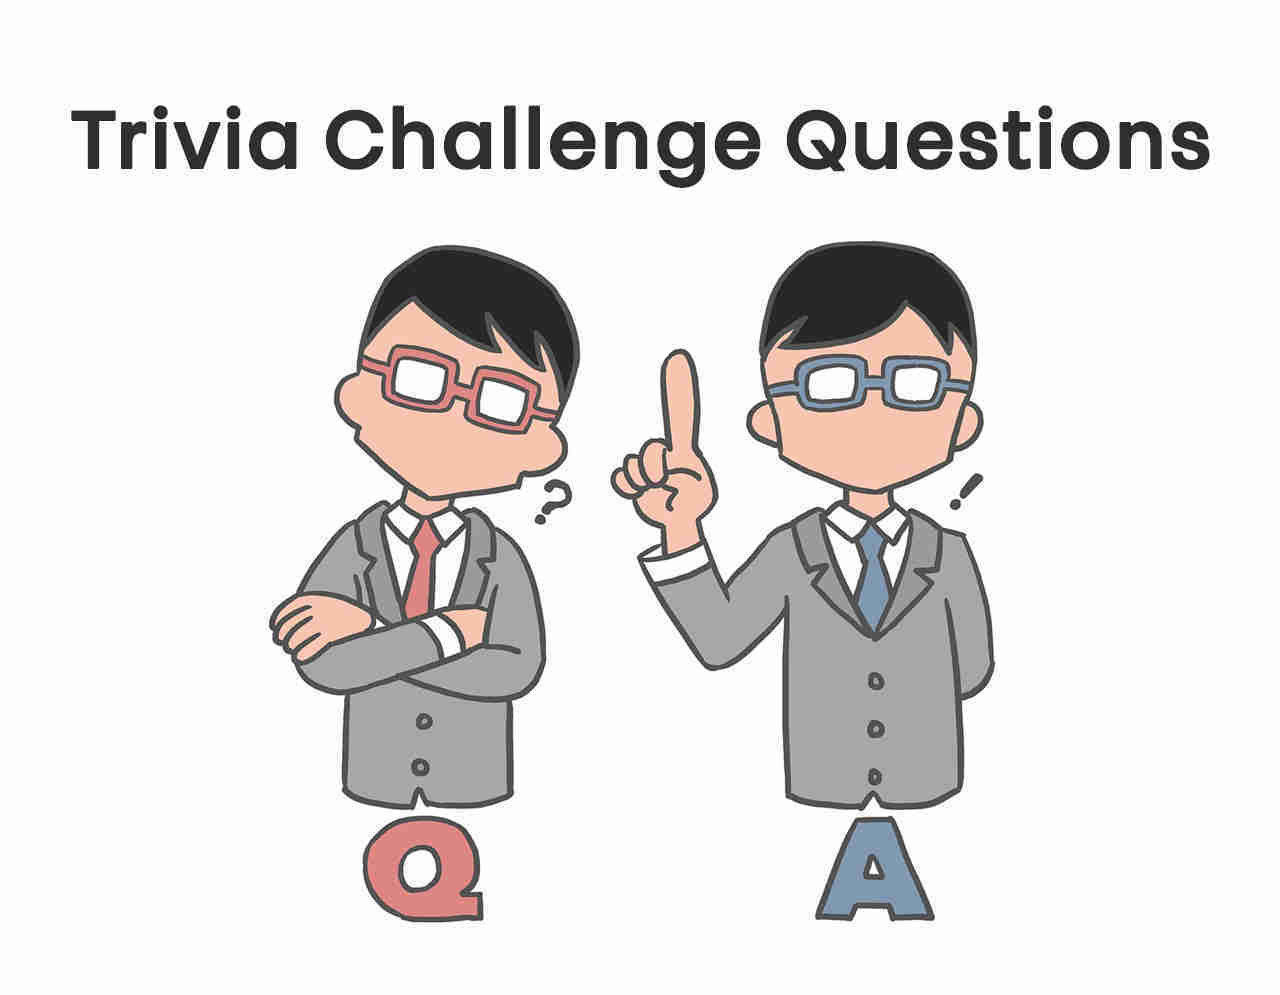 Trivia Challenge Questions and Answers